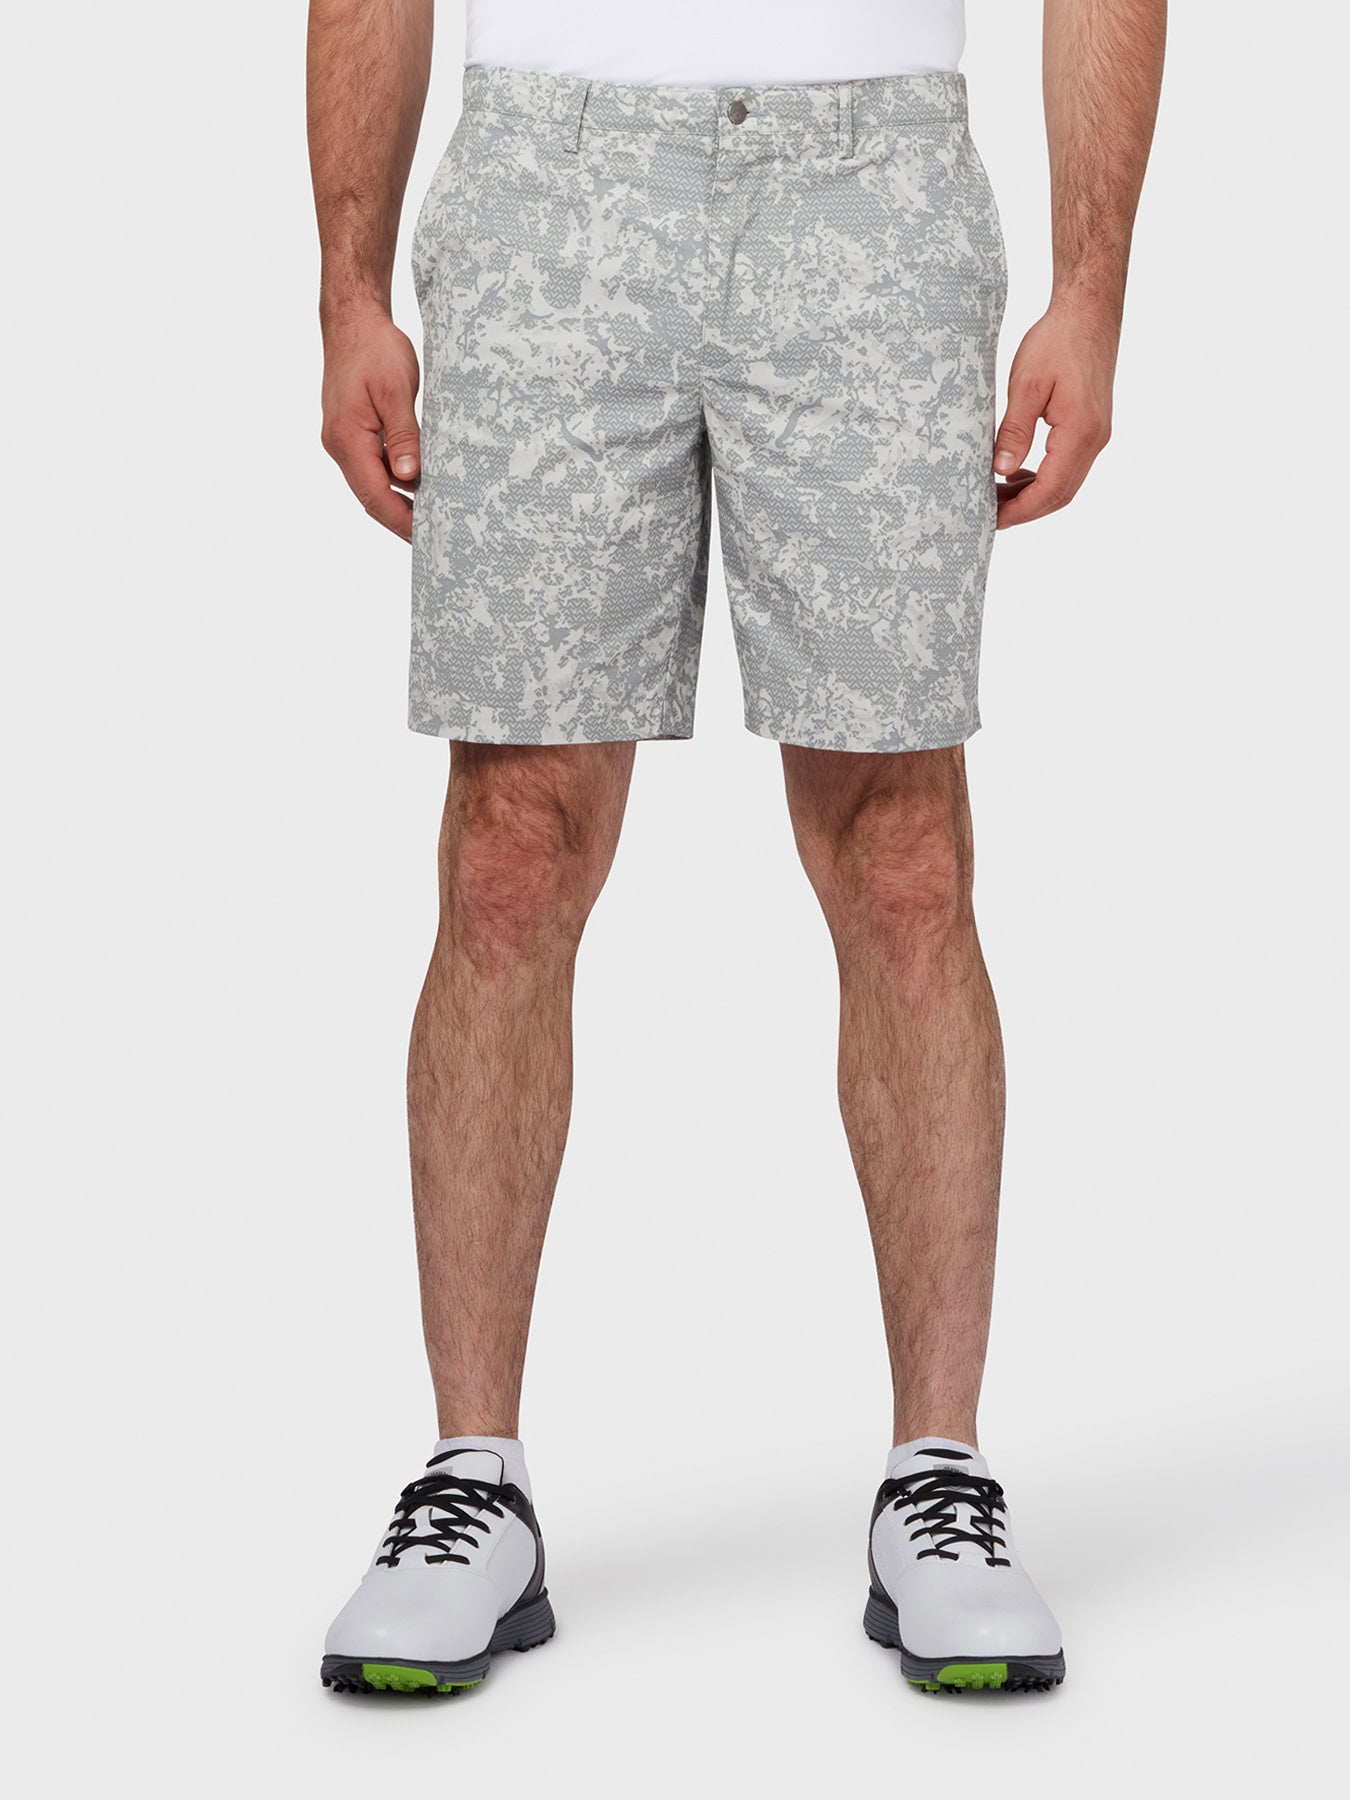 View X Series Abstract Camo Shorts In Quarry Grey Quarry 30 information